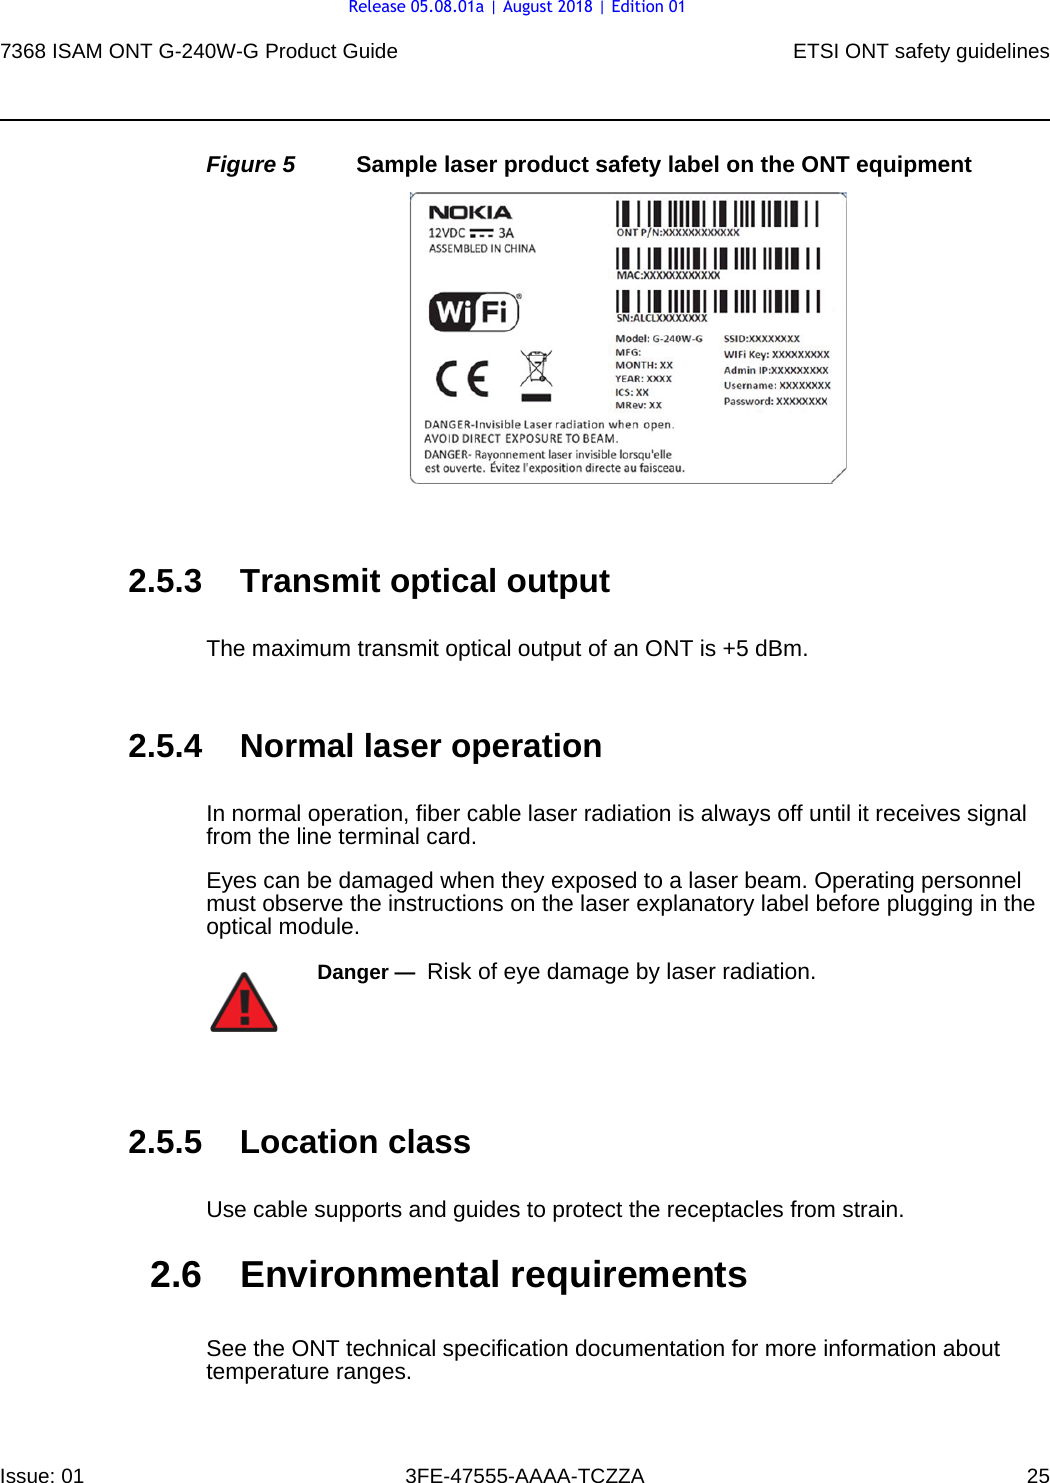 7368 ISAM ONT G-240W-G Product Guide ETSI ONT safety guidelinesIssue: 01 3FE-47555-AAAA-TCZZA 25 Figure 5 Sample laser product safety label on the ONT equipment2.5.3 Transmit optical outputThe maximum transmit optical output of an ONT is +5 dBm.2.5.4 Normal laser operationIn normal operation, fiber cable laser radiation is always off until it receives signal from the line terminal card.Eyes can be damaged when they exposed to a laser beam. Operating personnel must observe the instructions on the laser explanatory label before plugging in the optical module.2.5.5 Location classUse cable supports and guides to protect the receptacles from strain.2.6 Environmental requirementsSee the ONT technical specification documentation for more information about temperature ranges.Danger —  Risk of eye damage by laser radiation.Release 05.08.01a | August 2018 | Edition 01